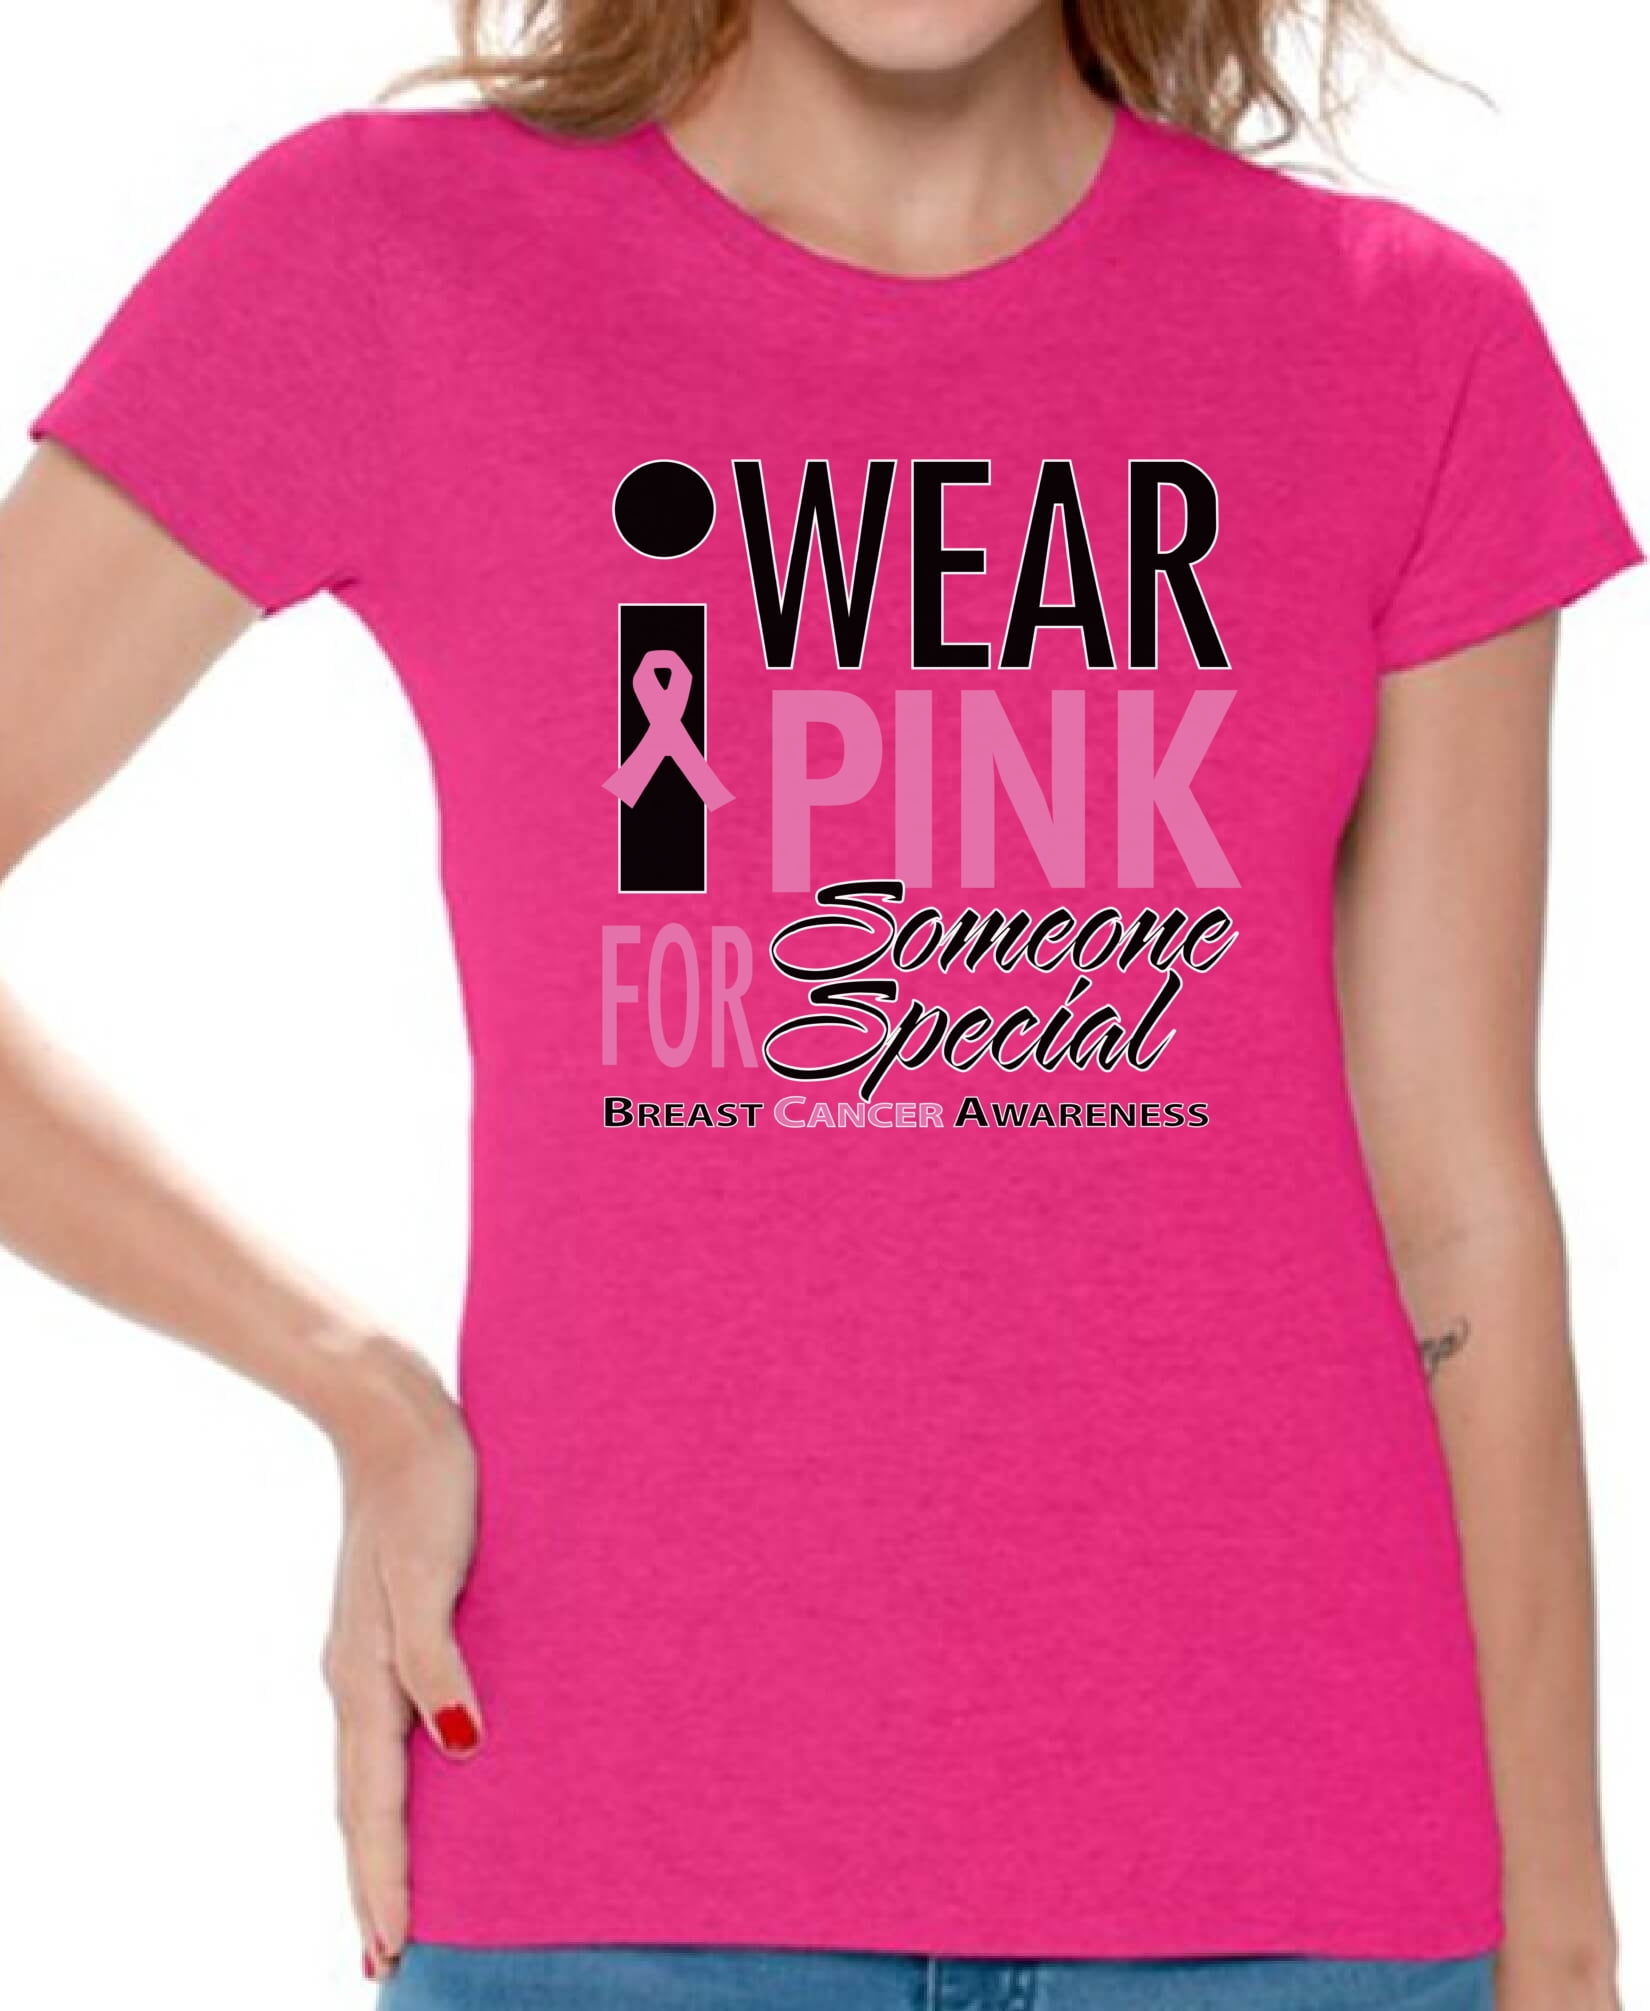 Breast Cancer Awareness Shirts Breast Cancer Shirts For Women Pink Ribbon Cancer Tshirts